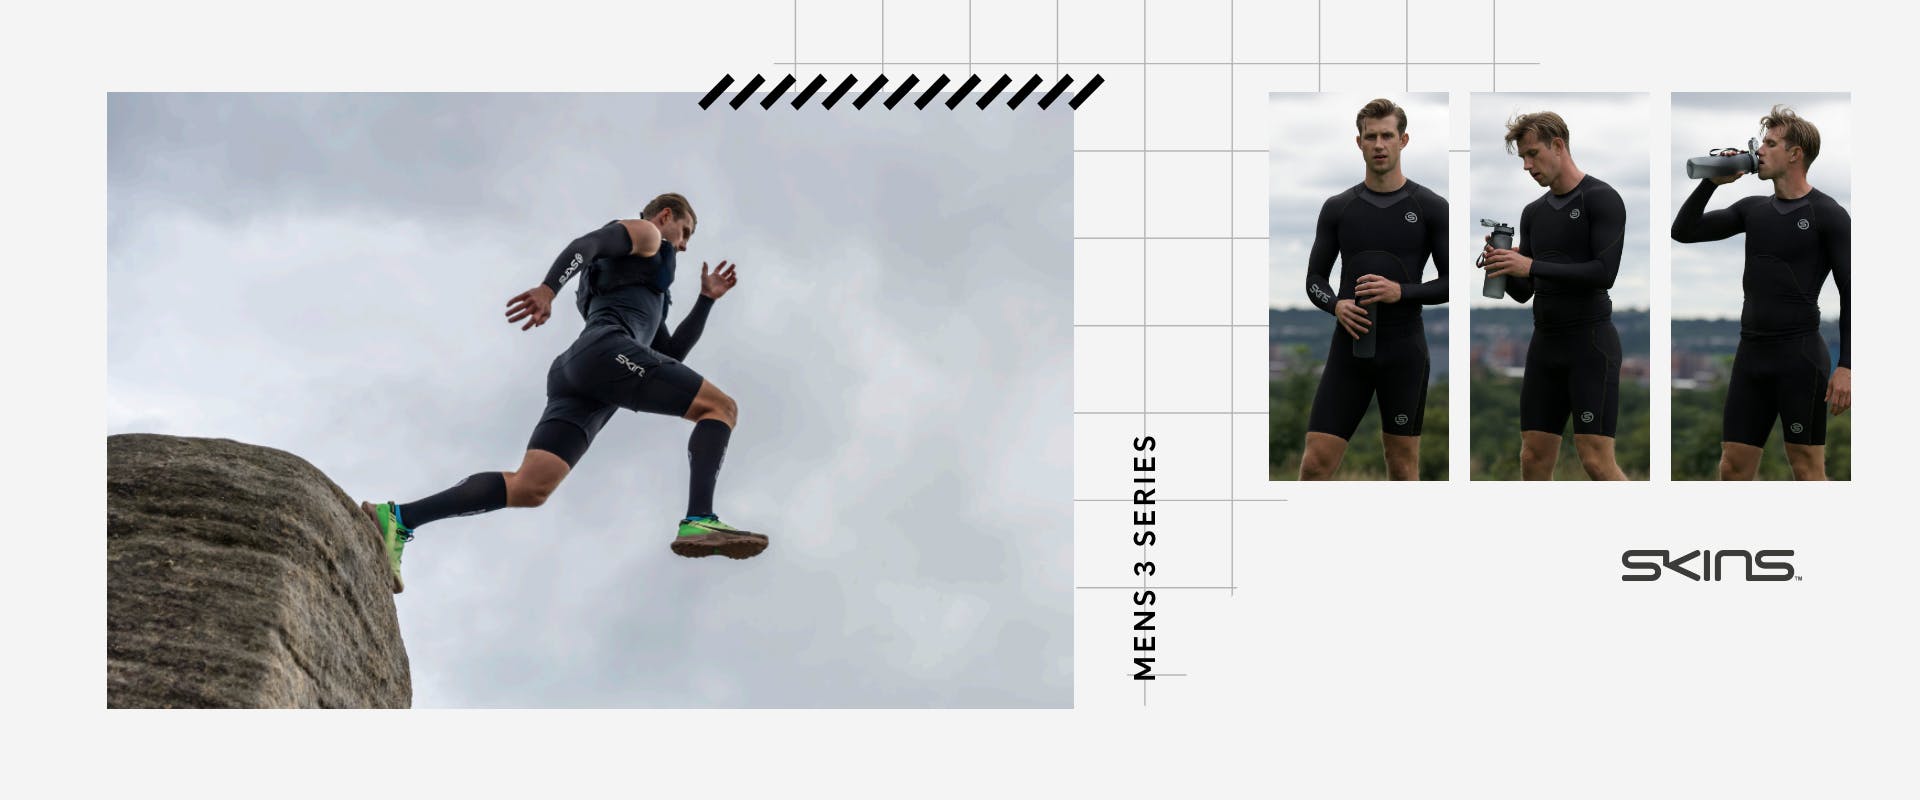 What Kit Should I Wear When Running? - SKINS Compression USA